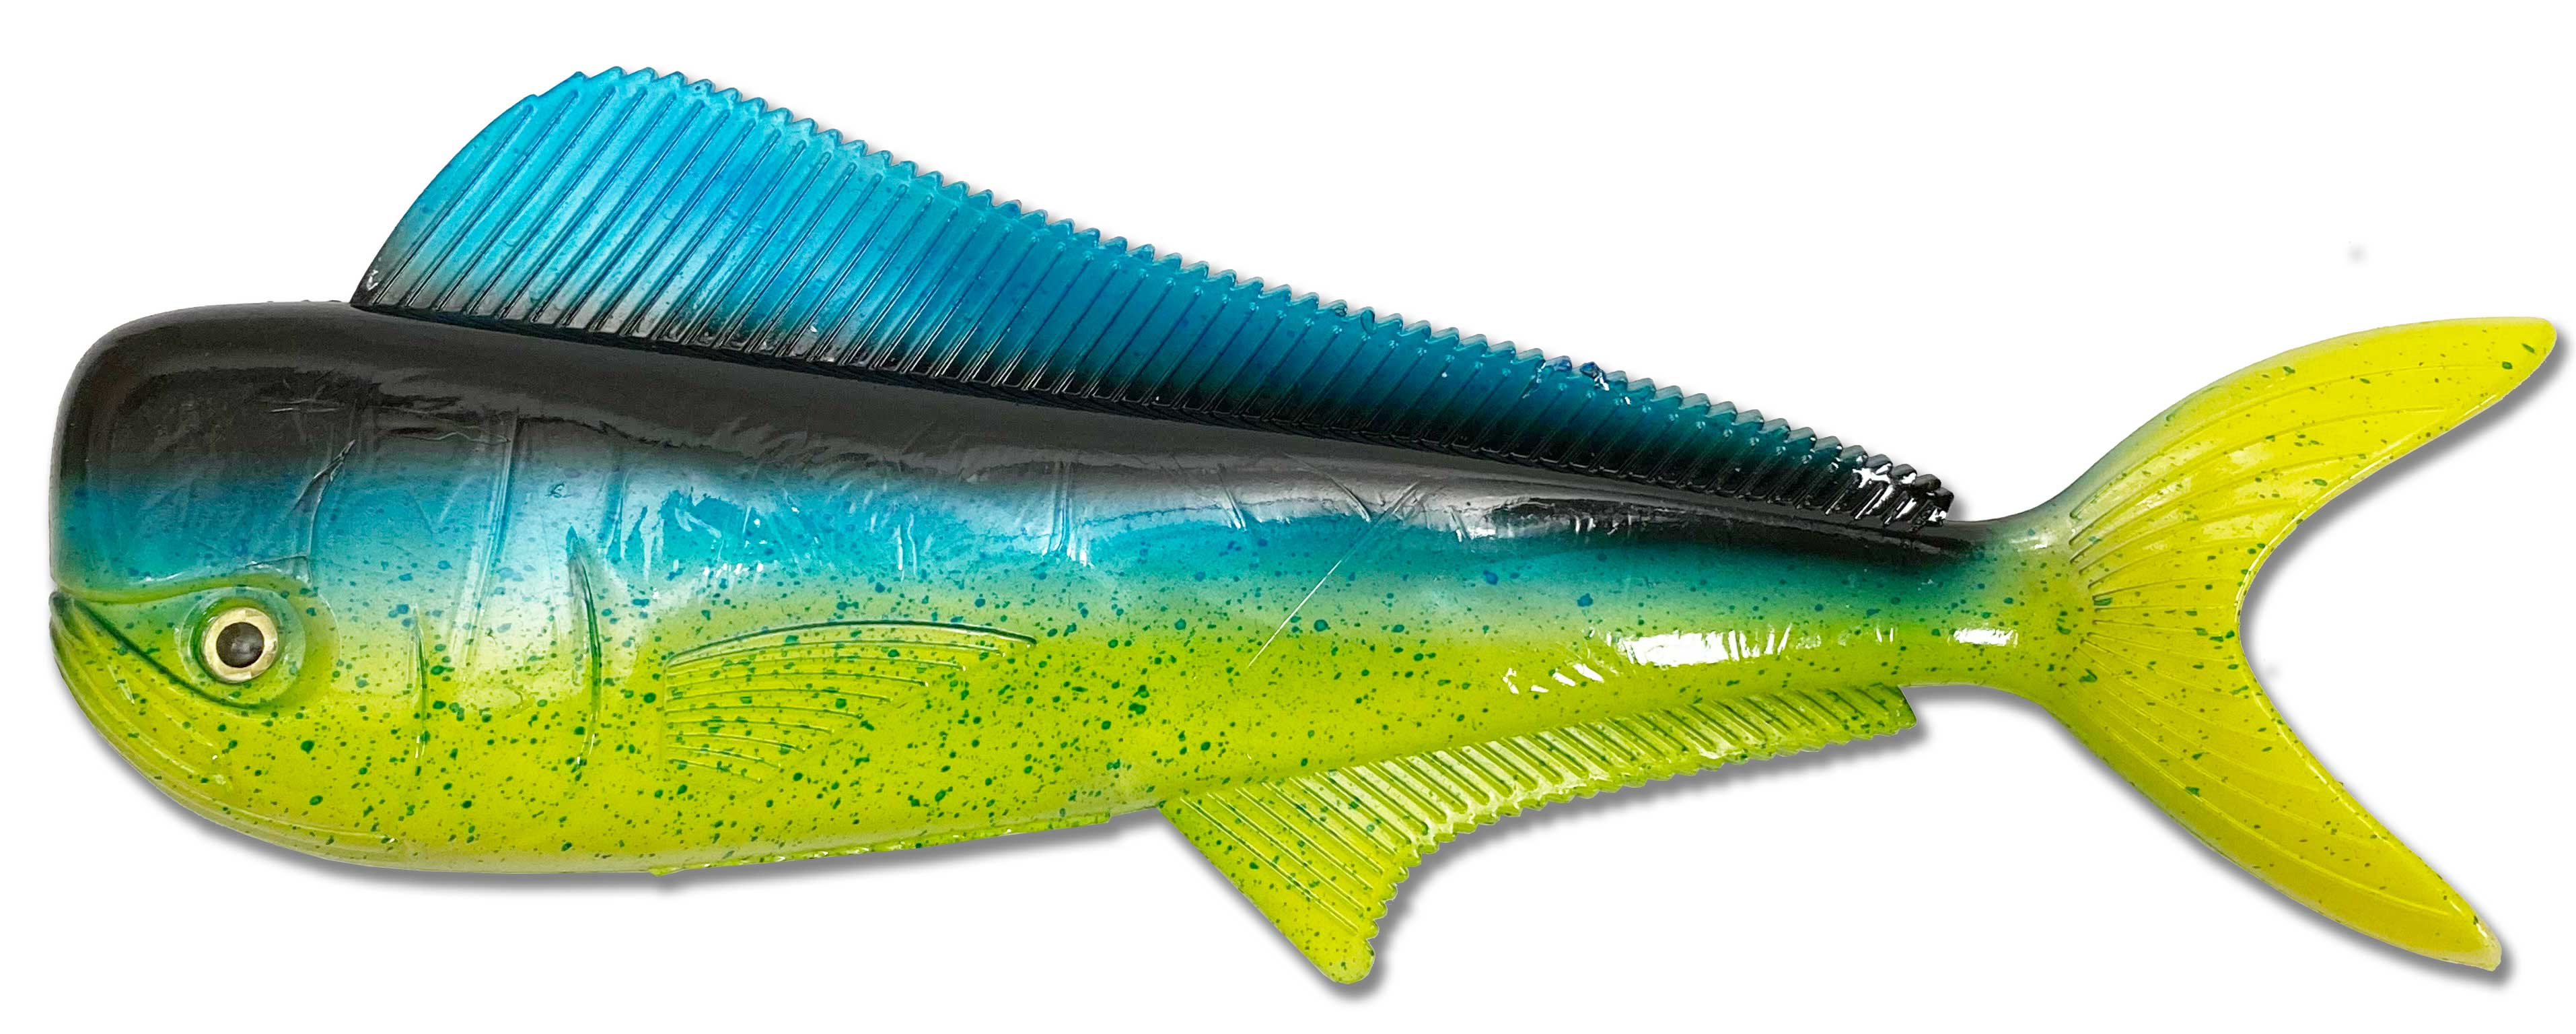 Artificial Mahi 12" Blue/Green/Yellow - Almost Alive Lures